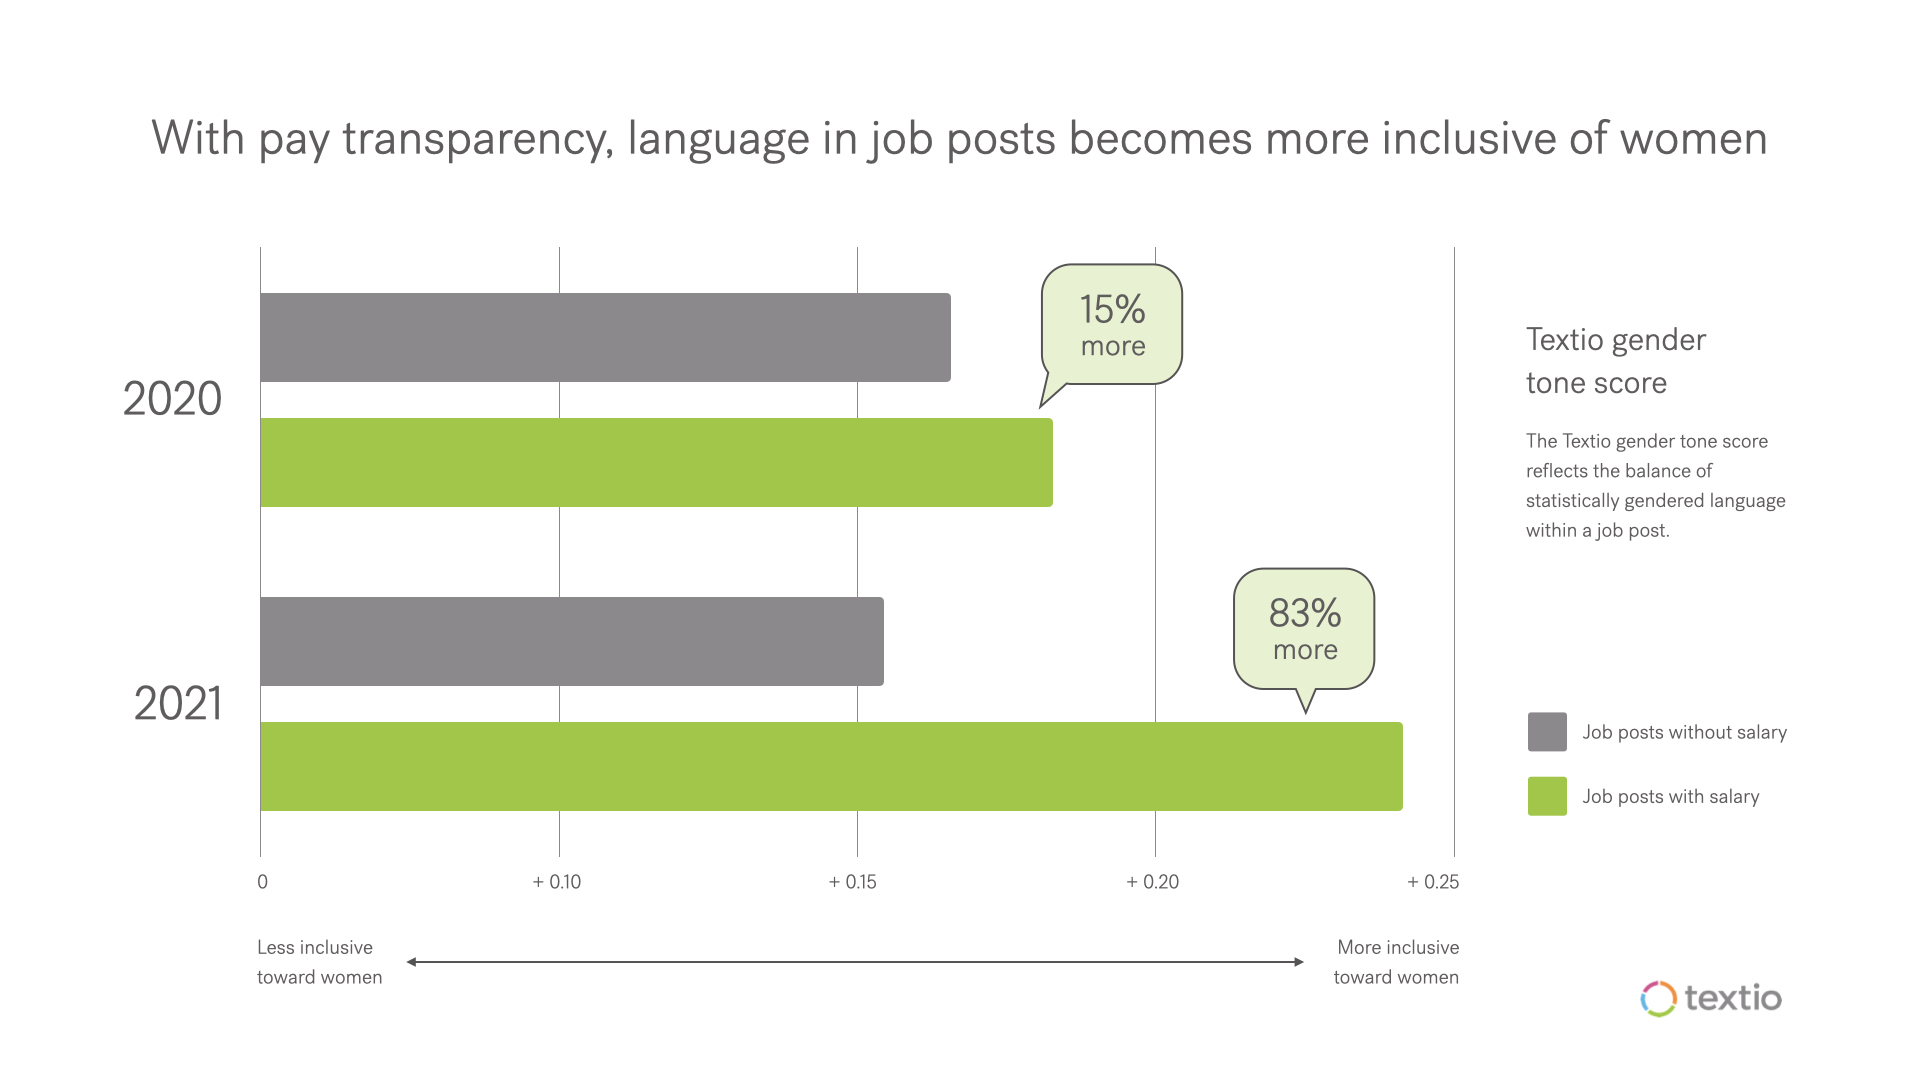 Bar chart labeled "With pay transparency, language in job posts becomes more inclusive of women" showing  job posts in 2020 that contain salary use 15% more language that is more inclusive toward women than job posts without salary, and showing job posts in 2021 that contain salary use 83% more language that is more inclusive toward women than job posts without salary 